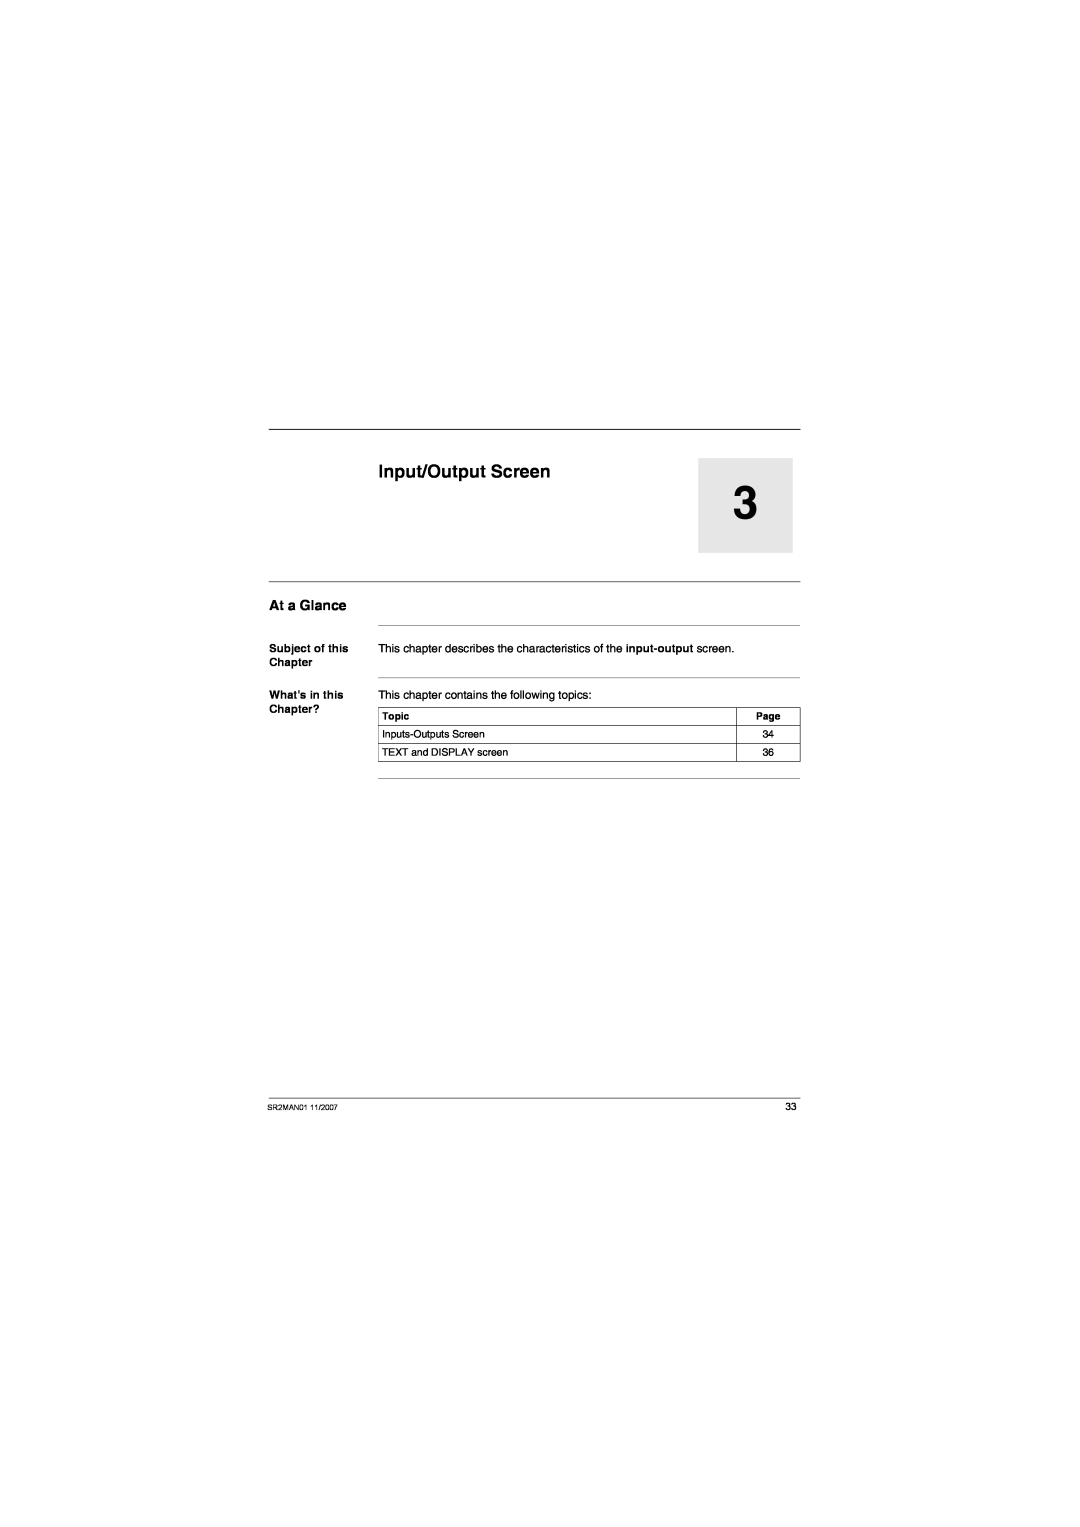 Schneider Electric SR2MAN01 Input/Output Screen, At a Glance, Subject of this Chapter Whats in this Chapter?, Topic, Page 